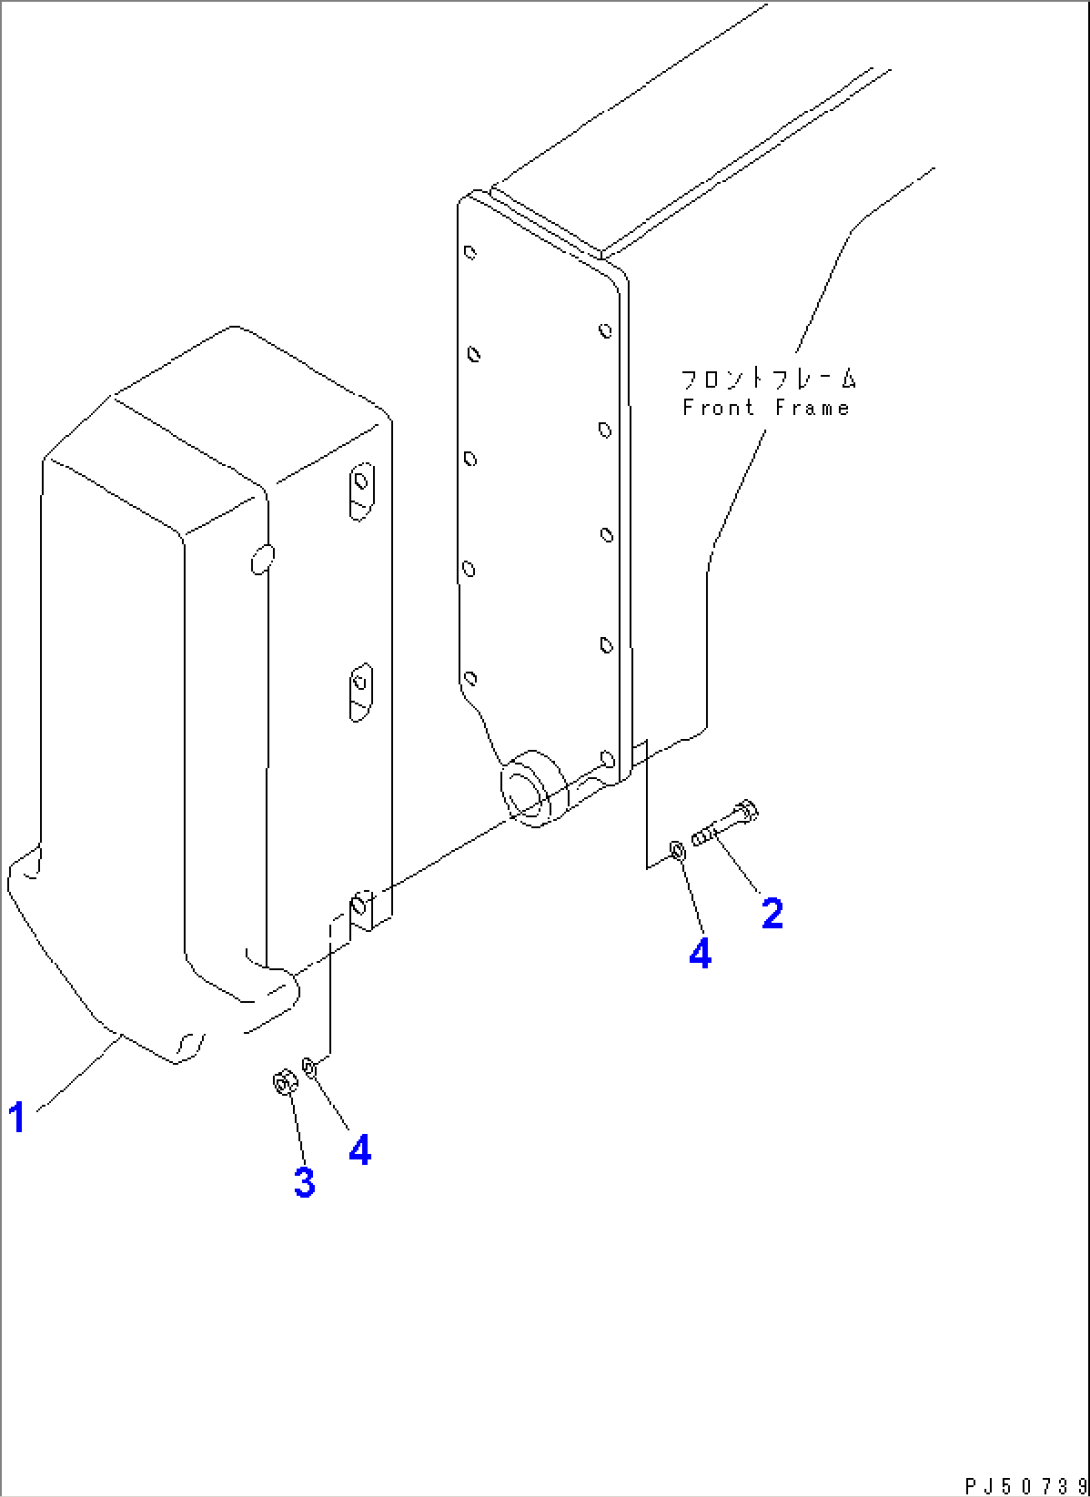 FRONT WEIGHT (PUSH PLATE)